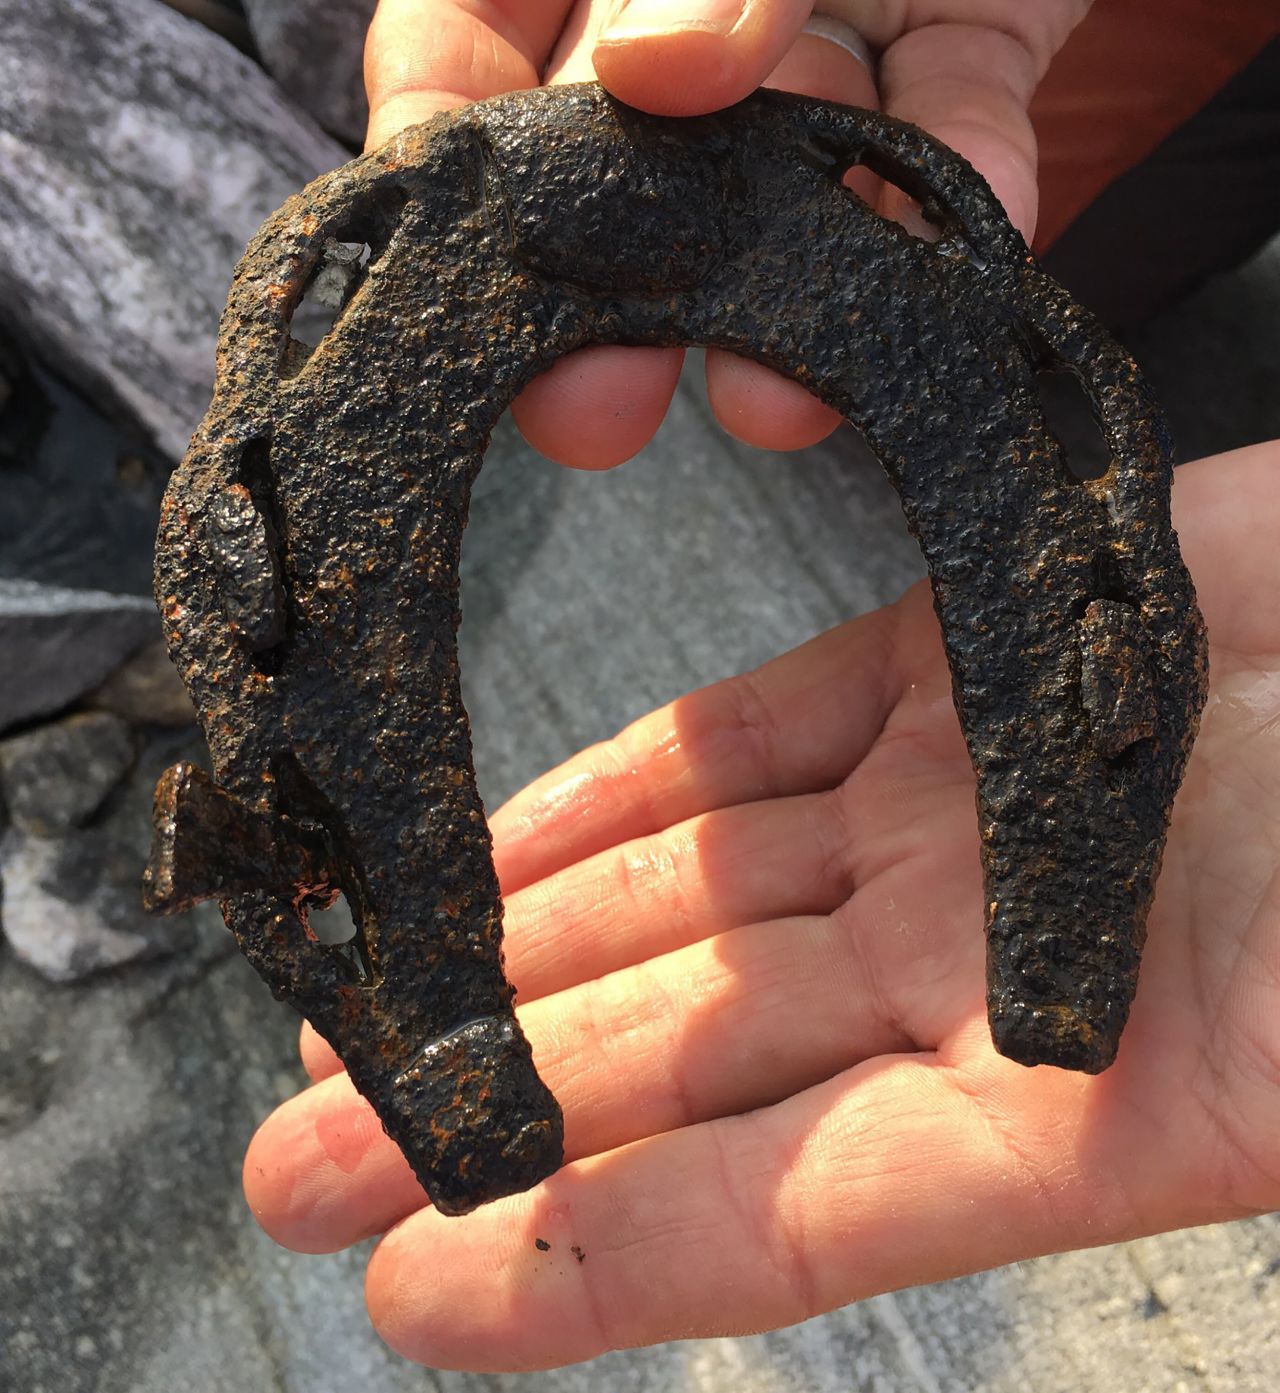 This horseshoe was recovered along the pass, including a small part of the hoof star still attached to the other side. The shape is similar to those made between the 11th and 13th century AD. 